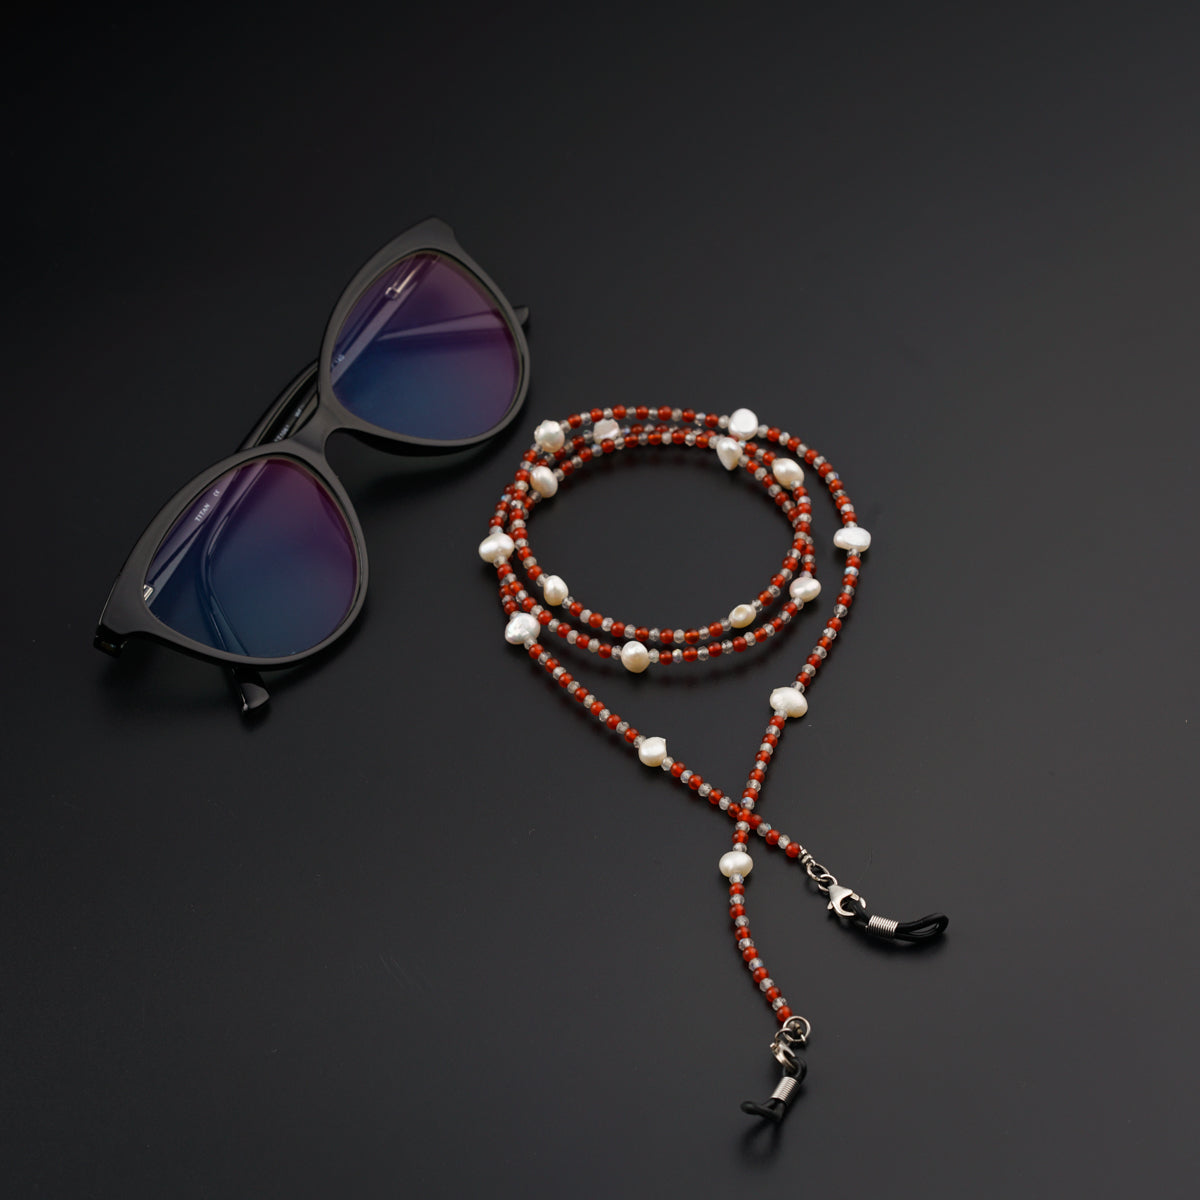 a pair of sunglasses and a beaded necklace